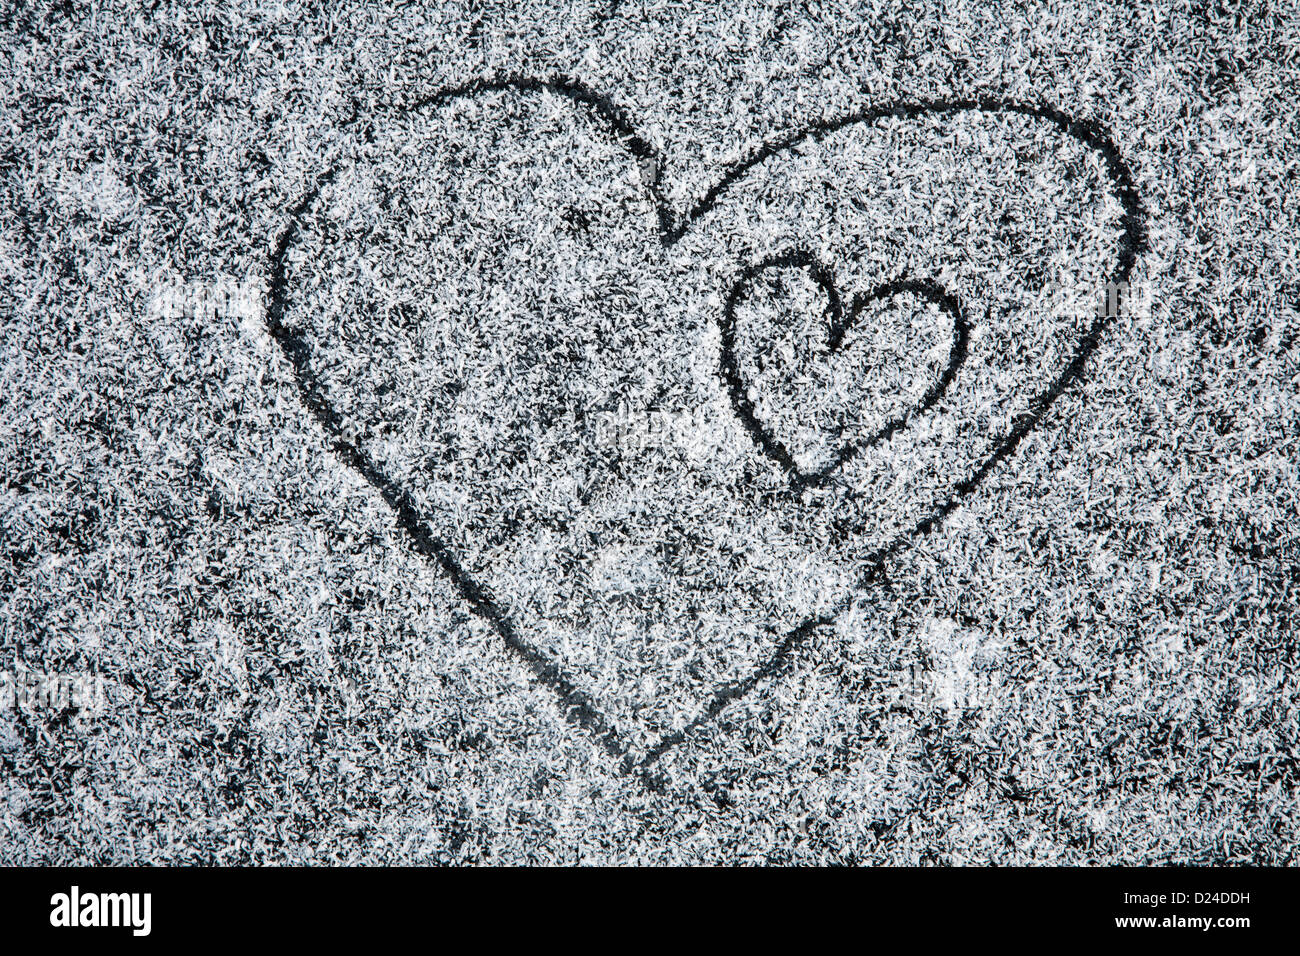 heart drawed on the icing on the ice Stock Photo